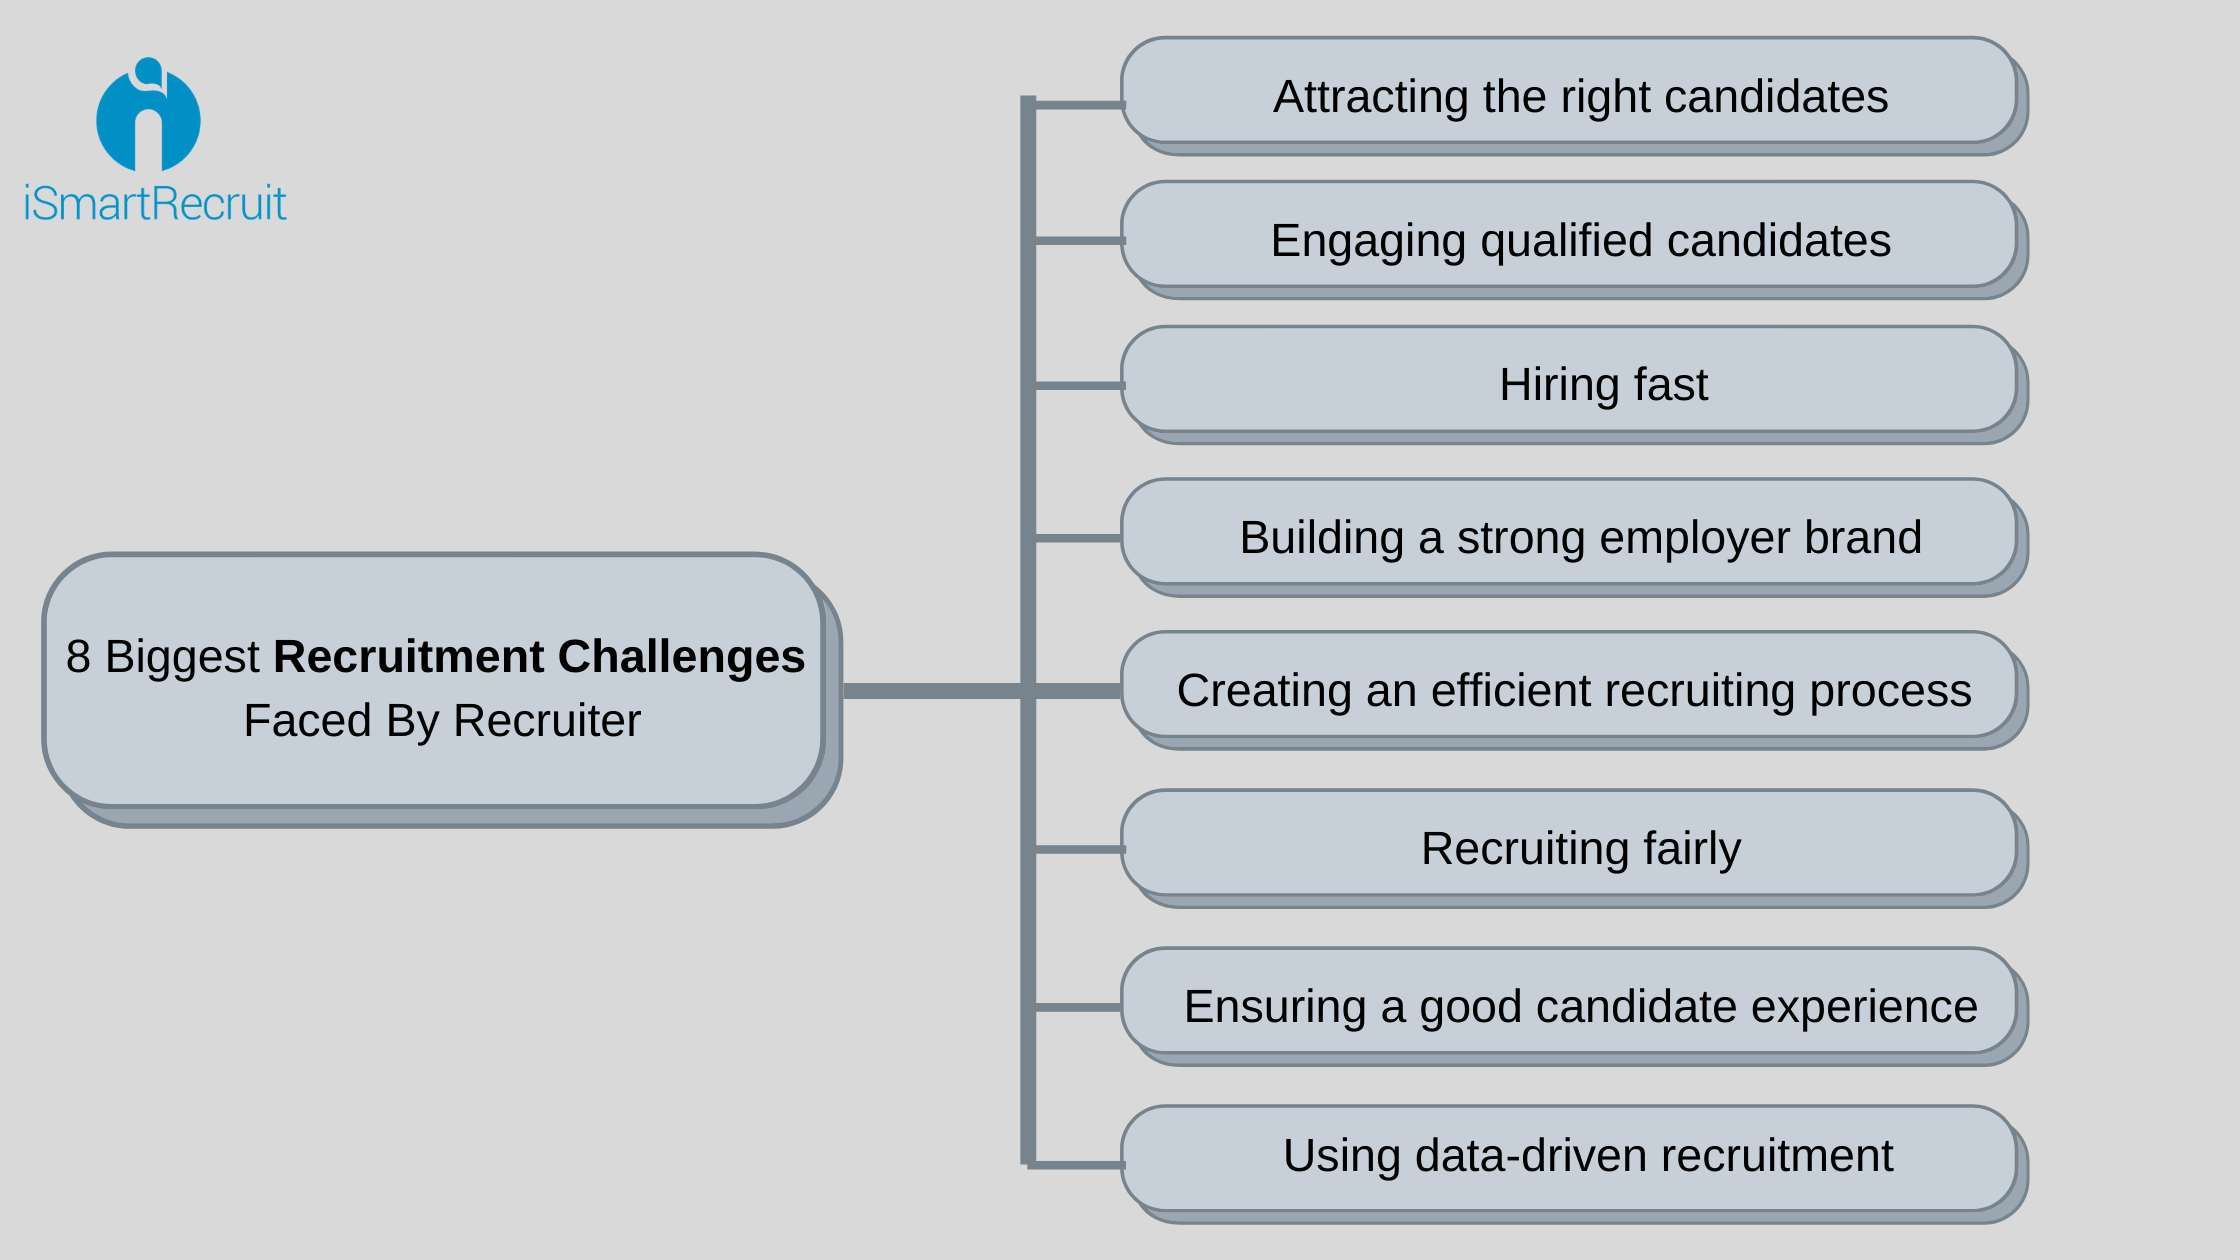 case study challenges of recruitment